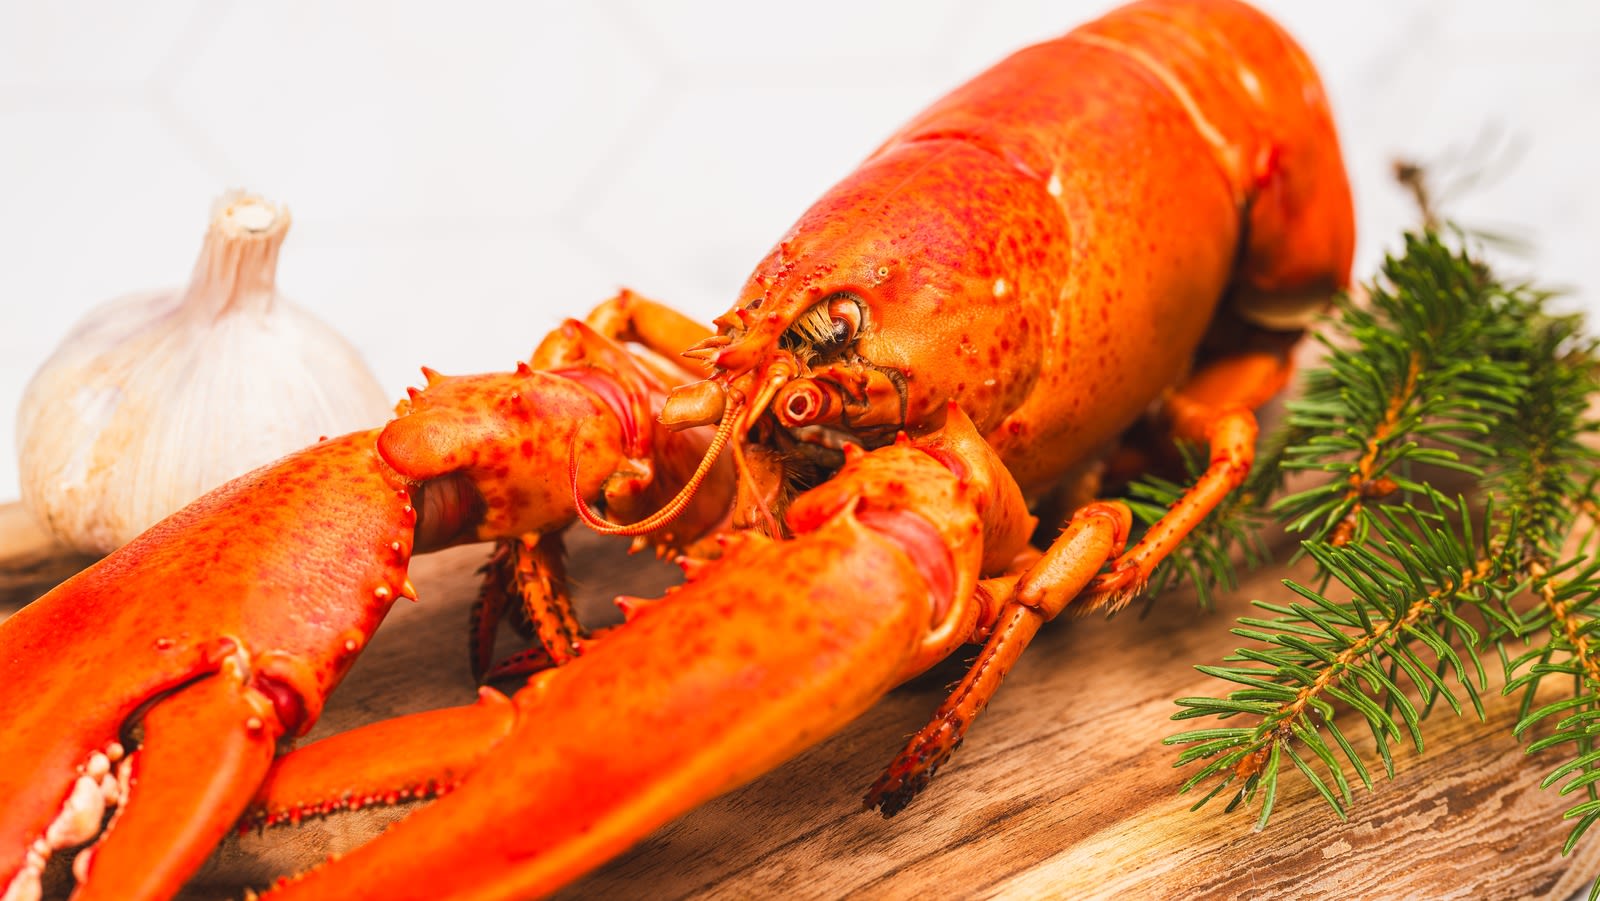 The 'Naked' Lobsters At Costco That Are Giving Serious Alien Vibes